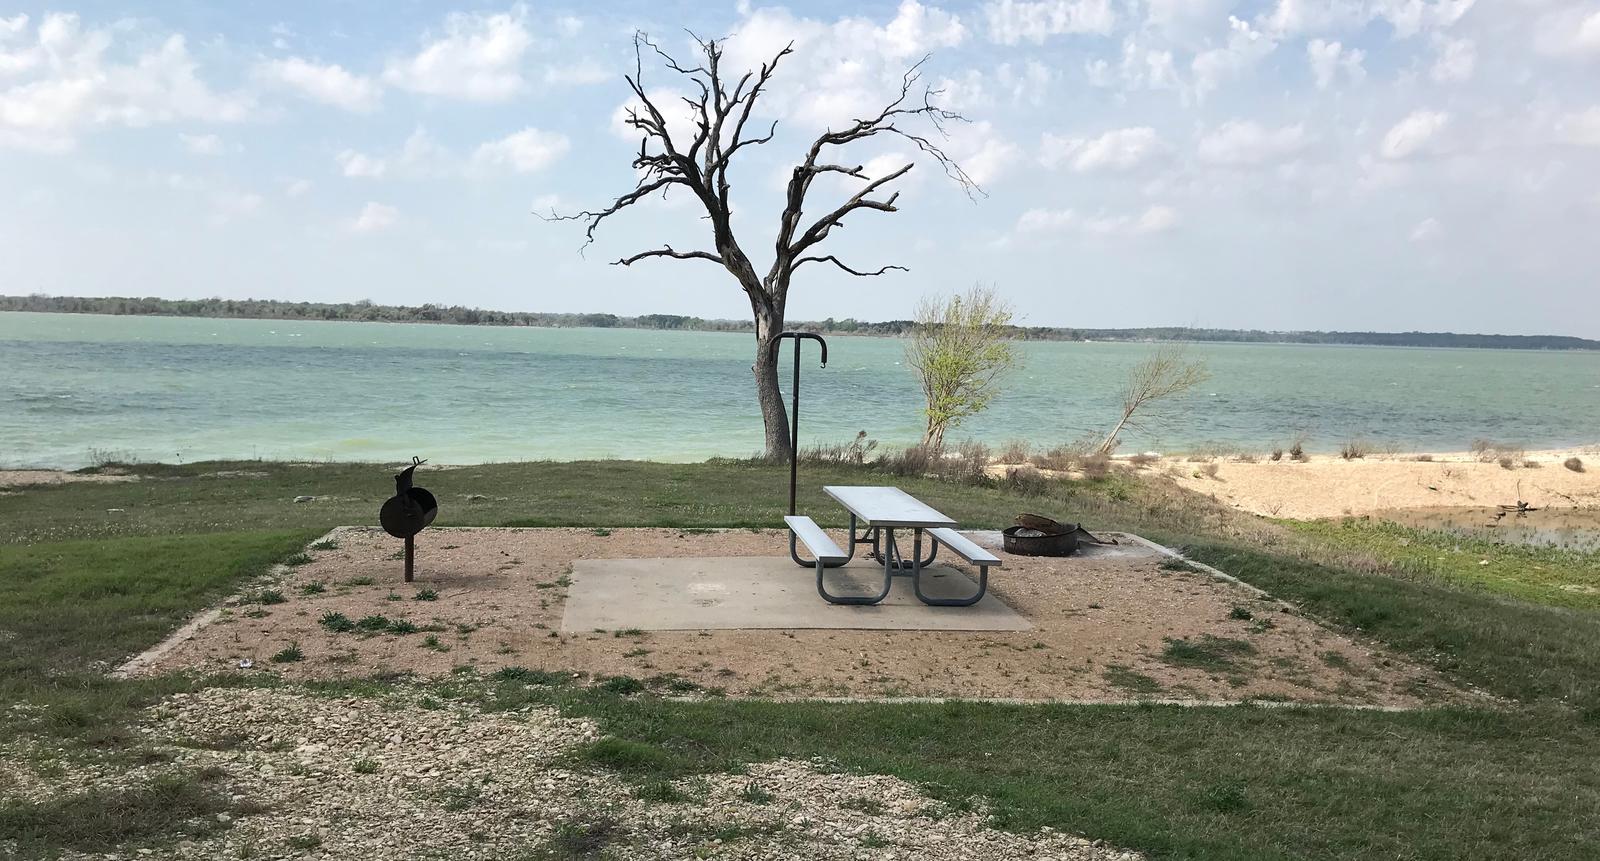 Tent site with picnic table, grill, and fire ring.  Site is located very close to shoreline of Waco Lake 